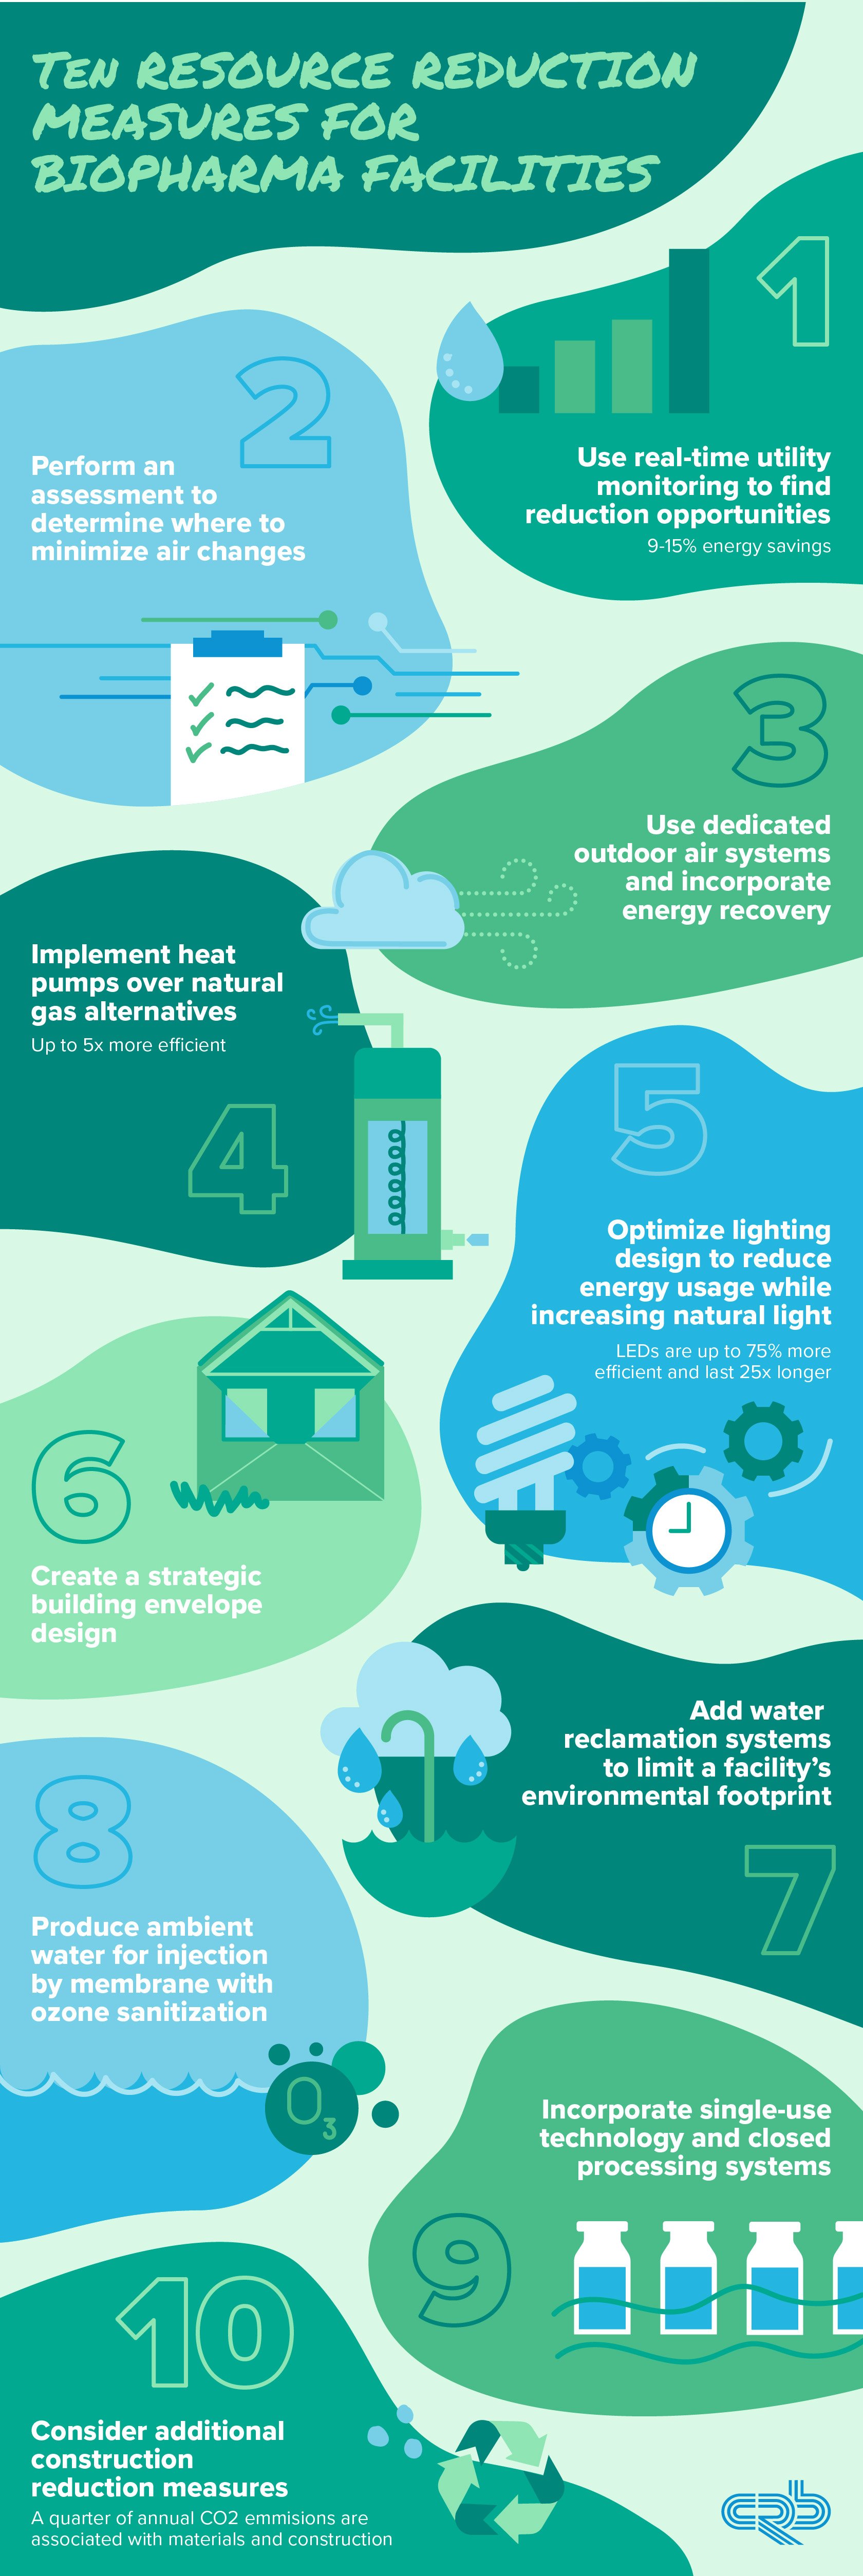 10 resource reduction solutions for biopharmaceutical sustainability infographic